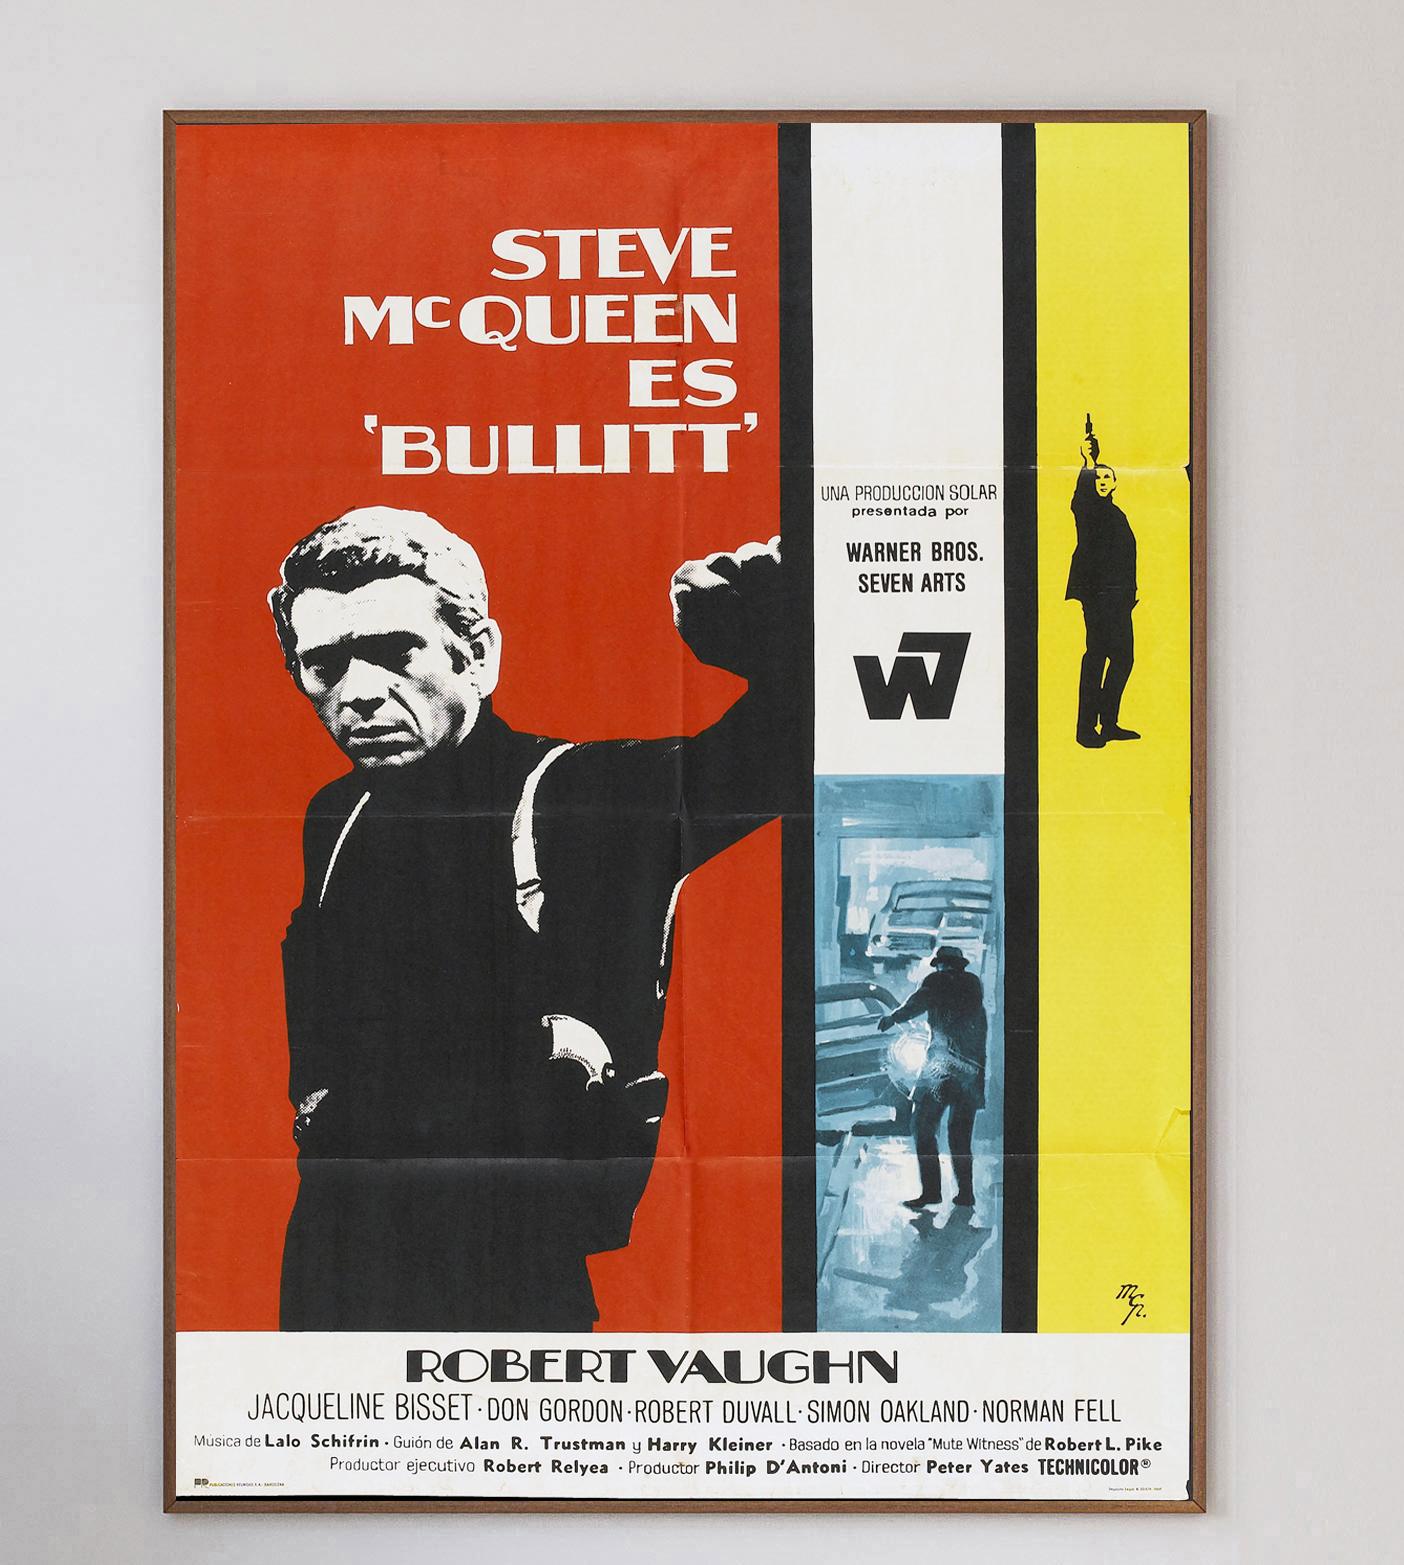 Depicting the iconic black and white image of McQueen in the titular role, this extremely rare and stunningly designed poster for Bullitt is a treasure from the midcentury.

Released in 1968, Peter Yates' action-thriller Bullitt was a critical and